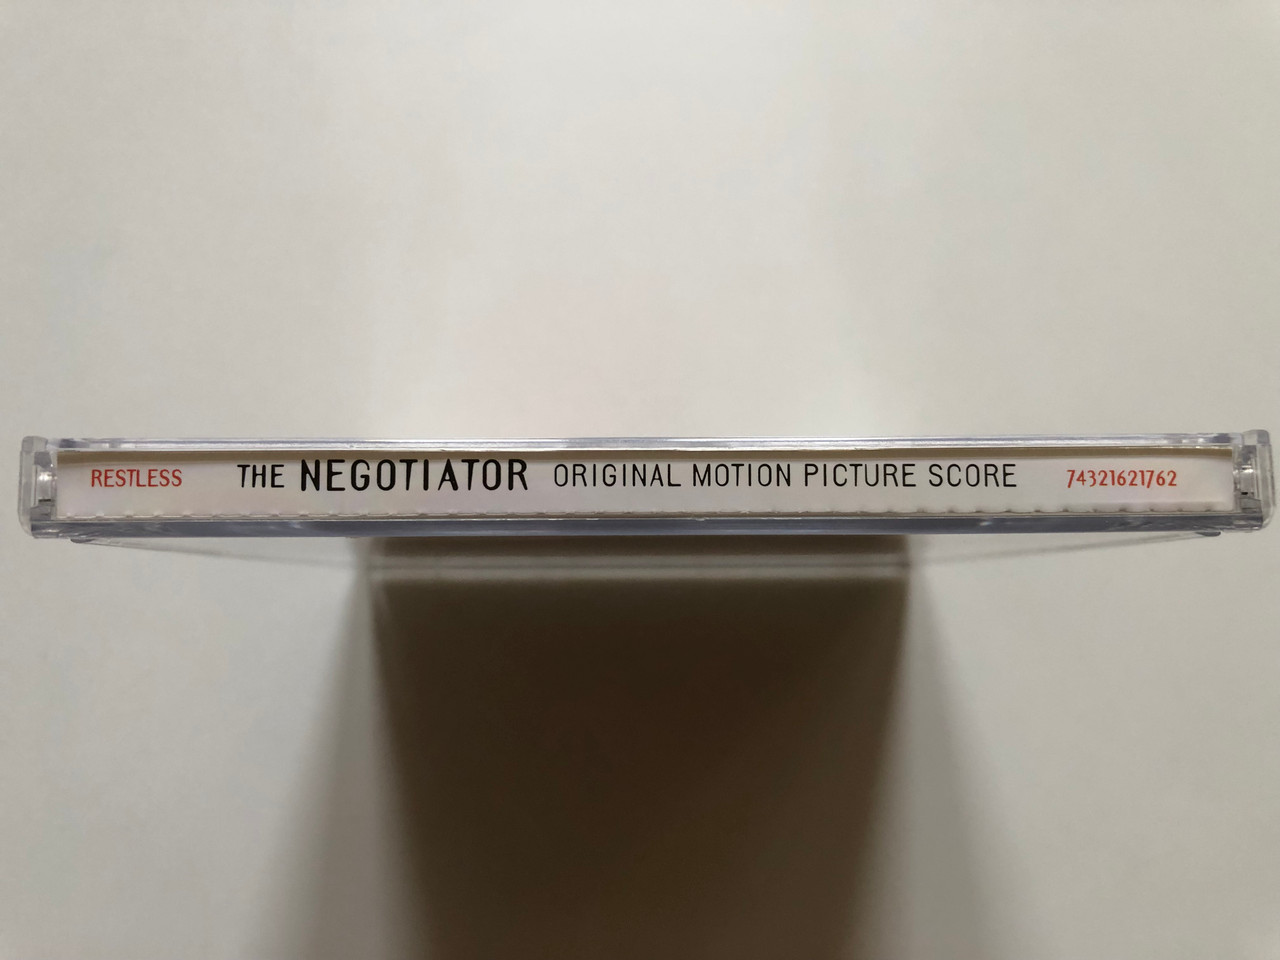 https://cdn10.bigcommerce.com/s-62bdpkt7pb/products/0/images/313286/Samuel_L._Jackson_Kevin_Spacey_The_Negotiator_Original_Motion_Picture_Score_-_Music_Composed_By_Graeme_Revell_Restless_Records_Audio_CD_1998_74321621762_3__56331.1700663288.1280.1280.JPG?c=2